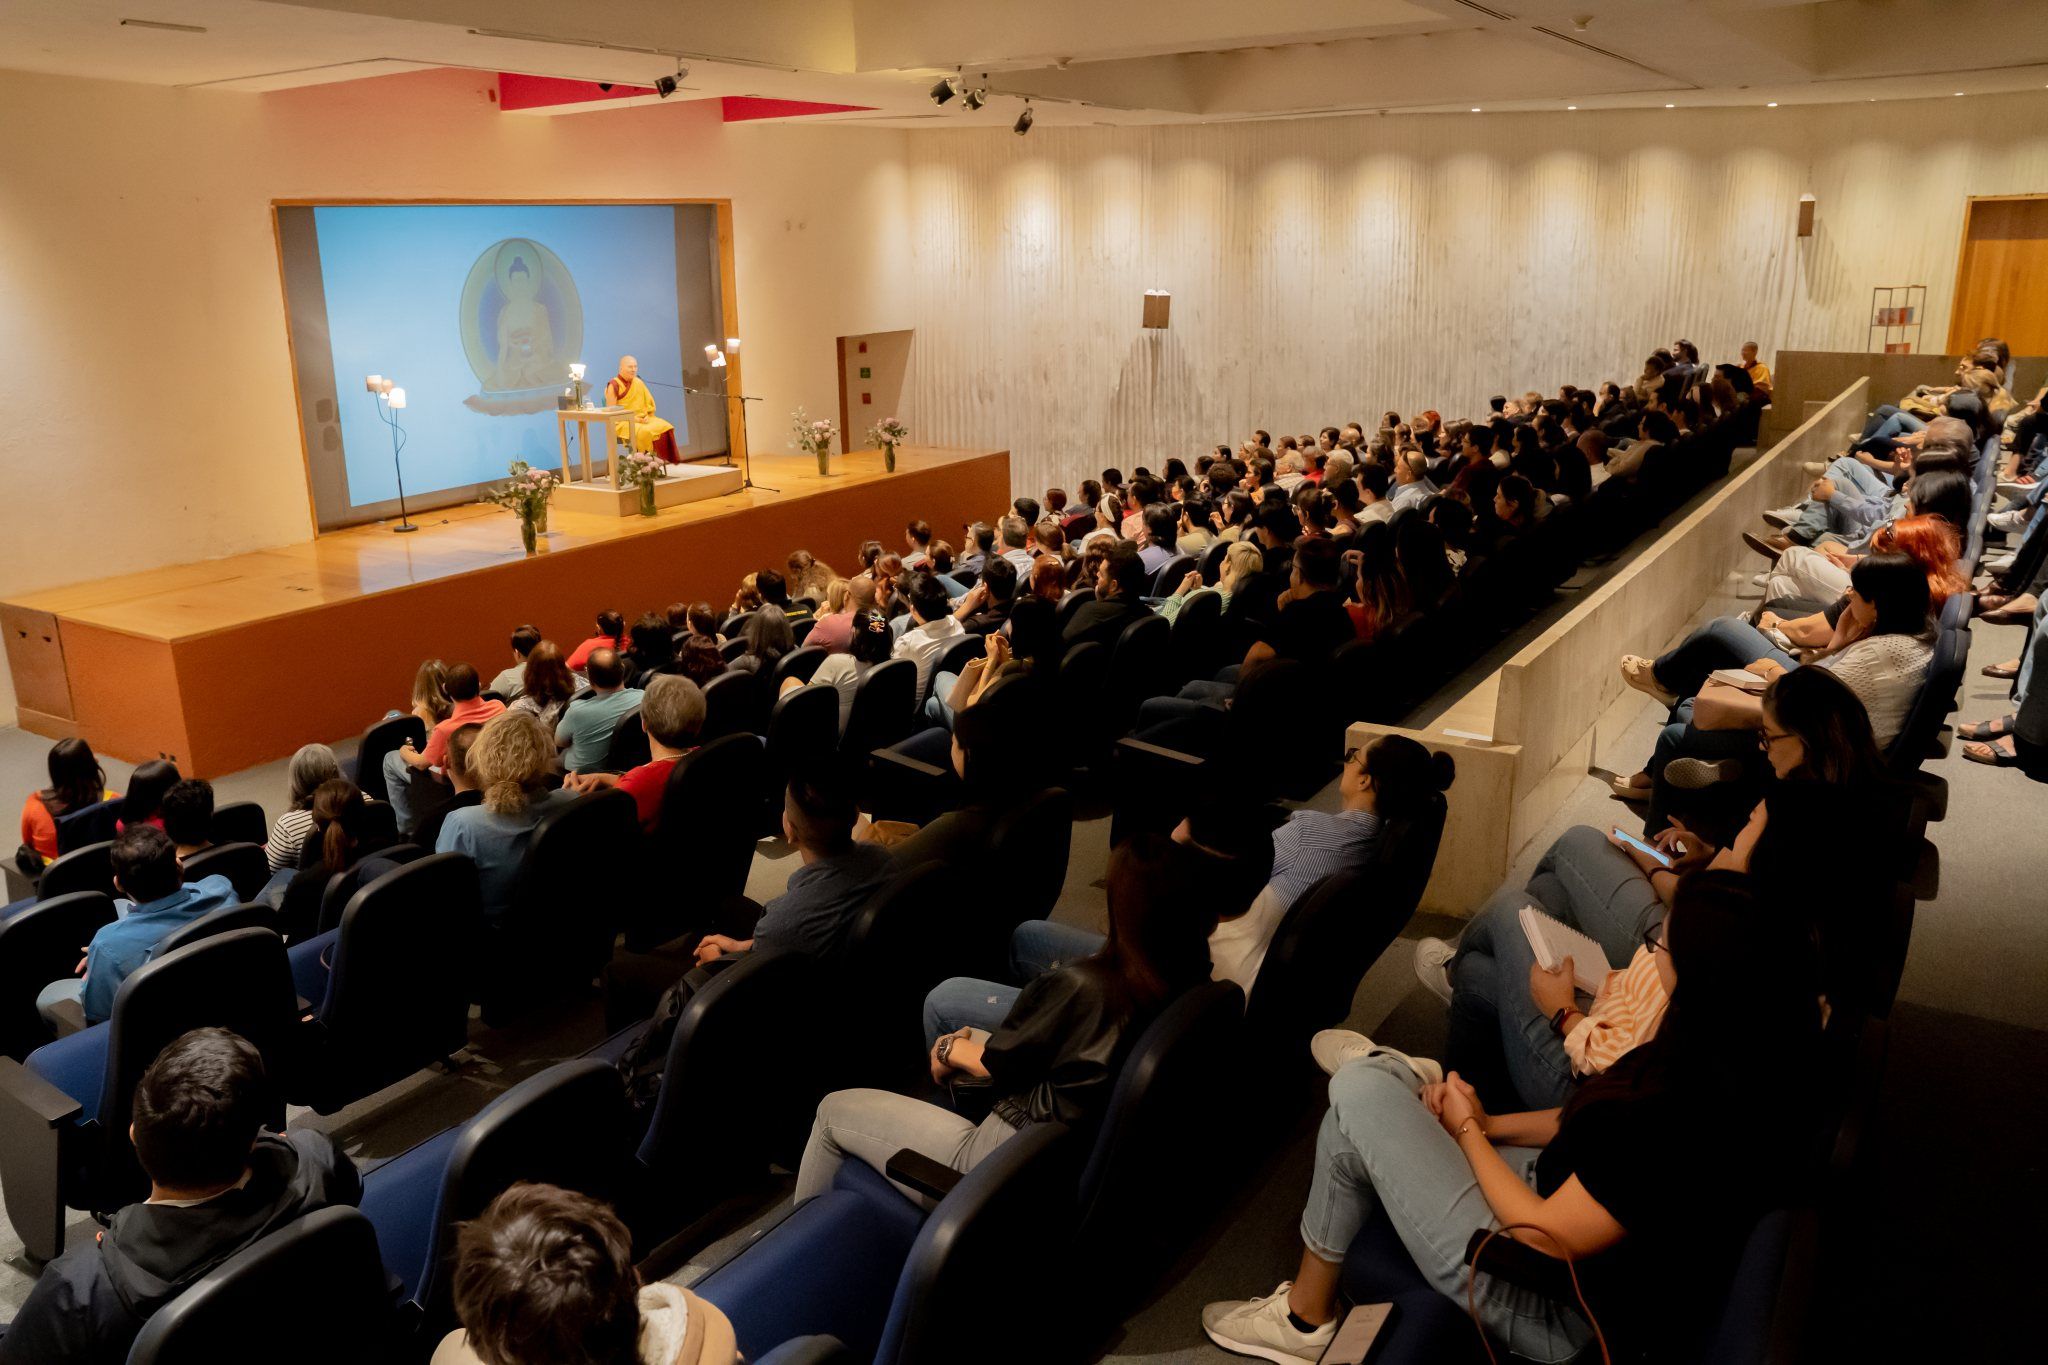 14th anniversary of KMC Monterrey & a special visit from Gen Kelsang Sangden